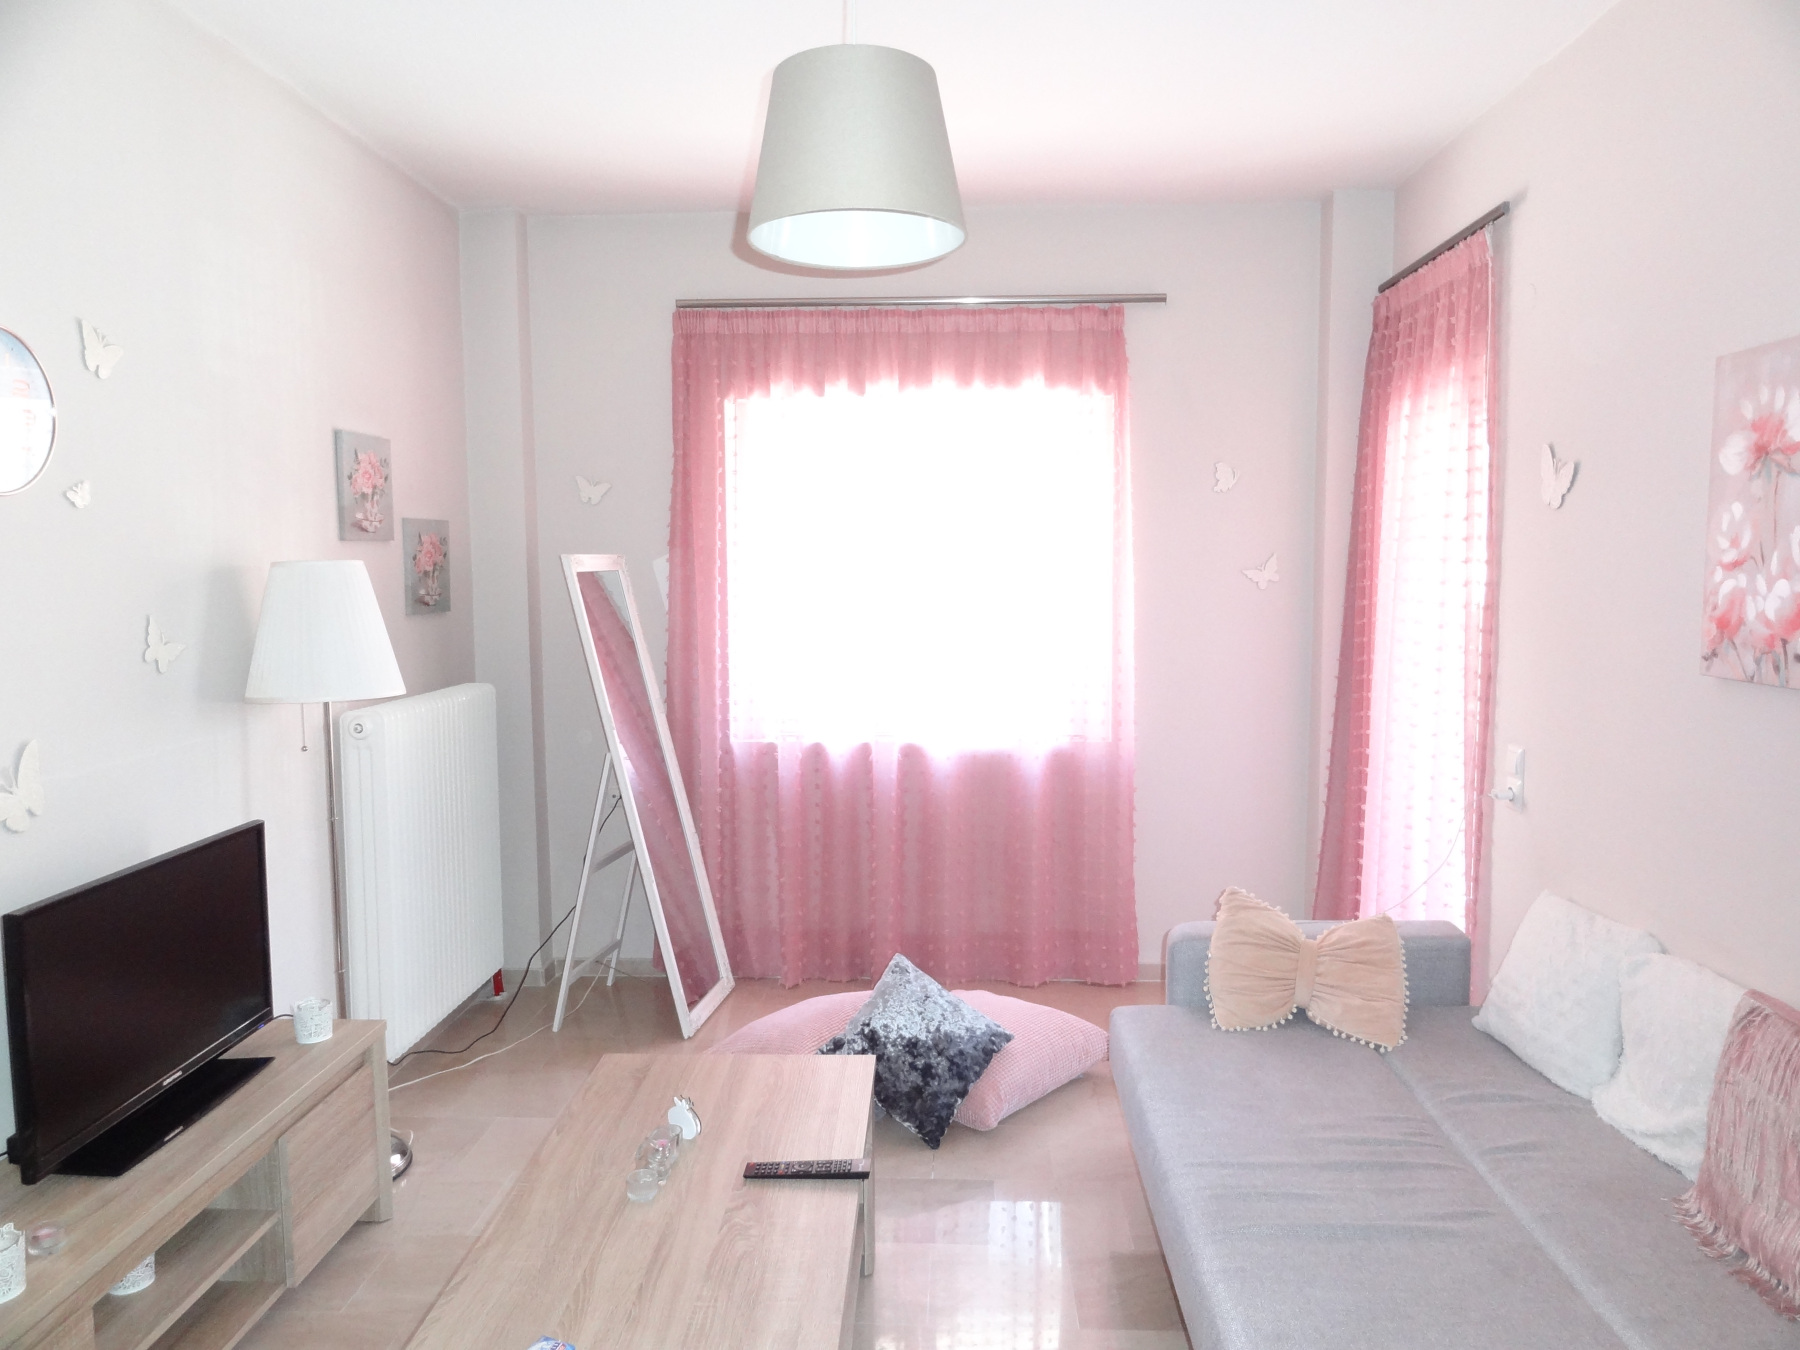 1 bedroom apartment for rent, 51 sq.m. 1st floor with parking near the KTEL station in Ioannina